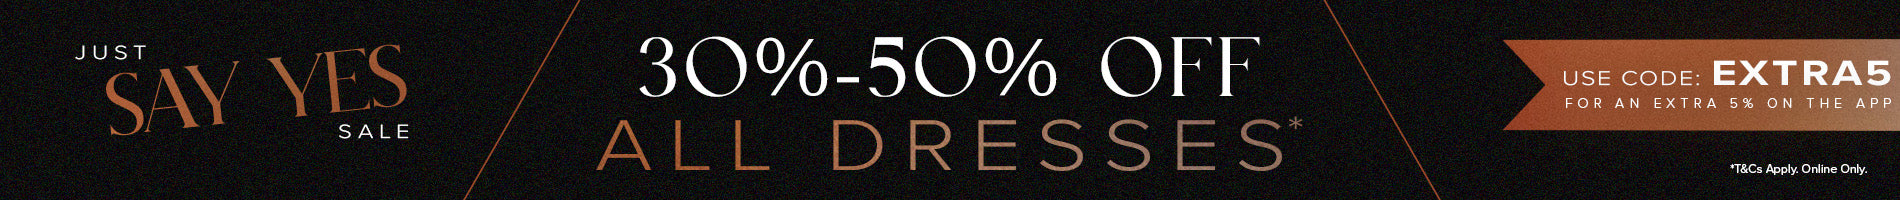 30-50% OFF Dresses* You And All Curvy Plus Size